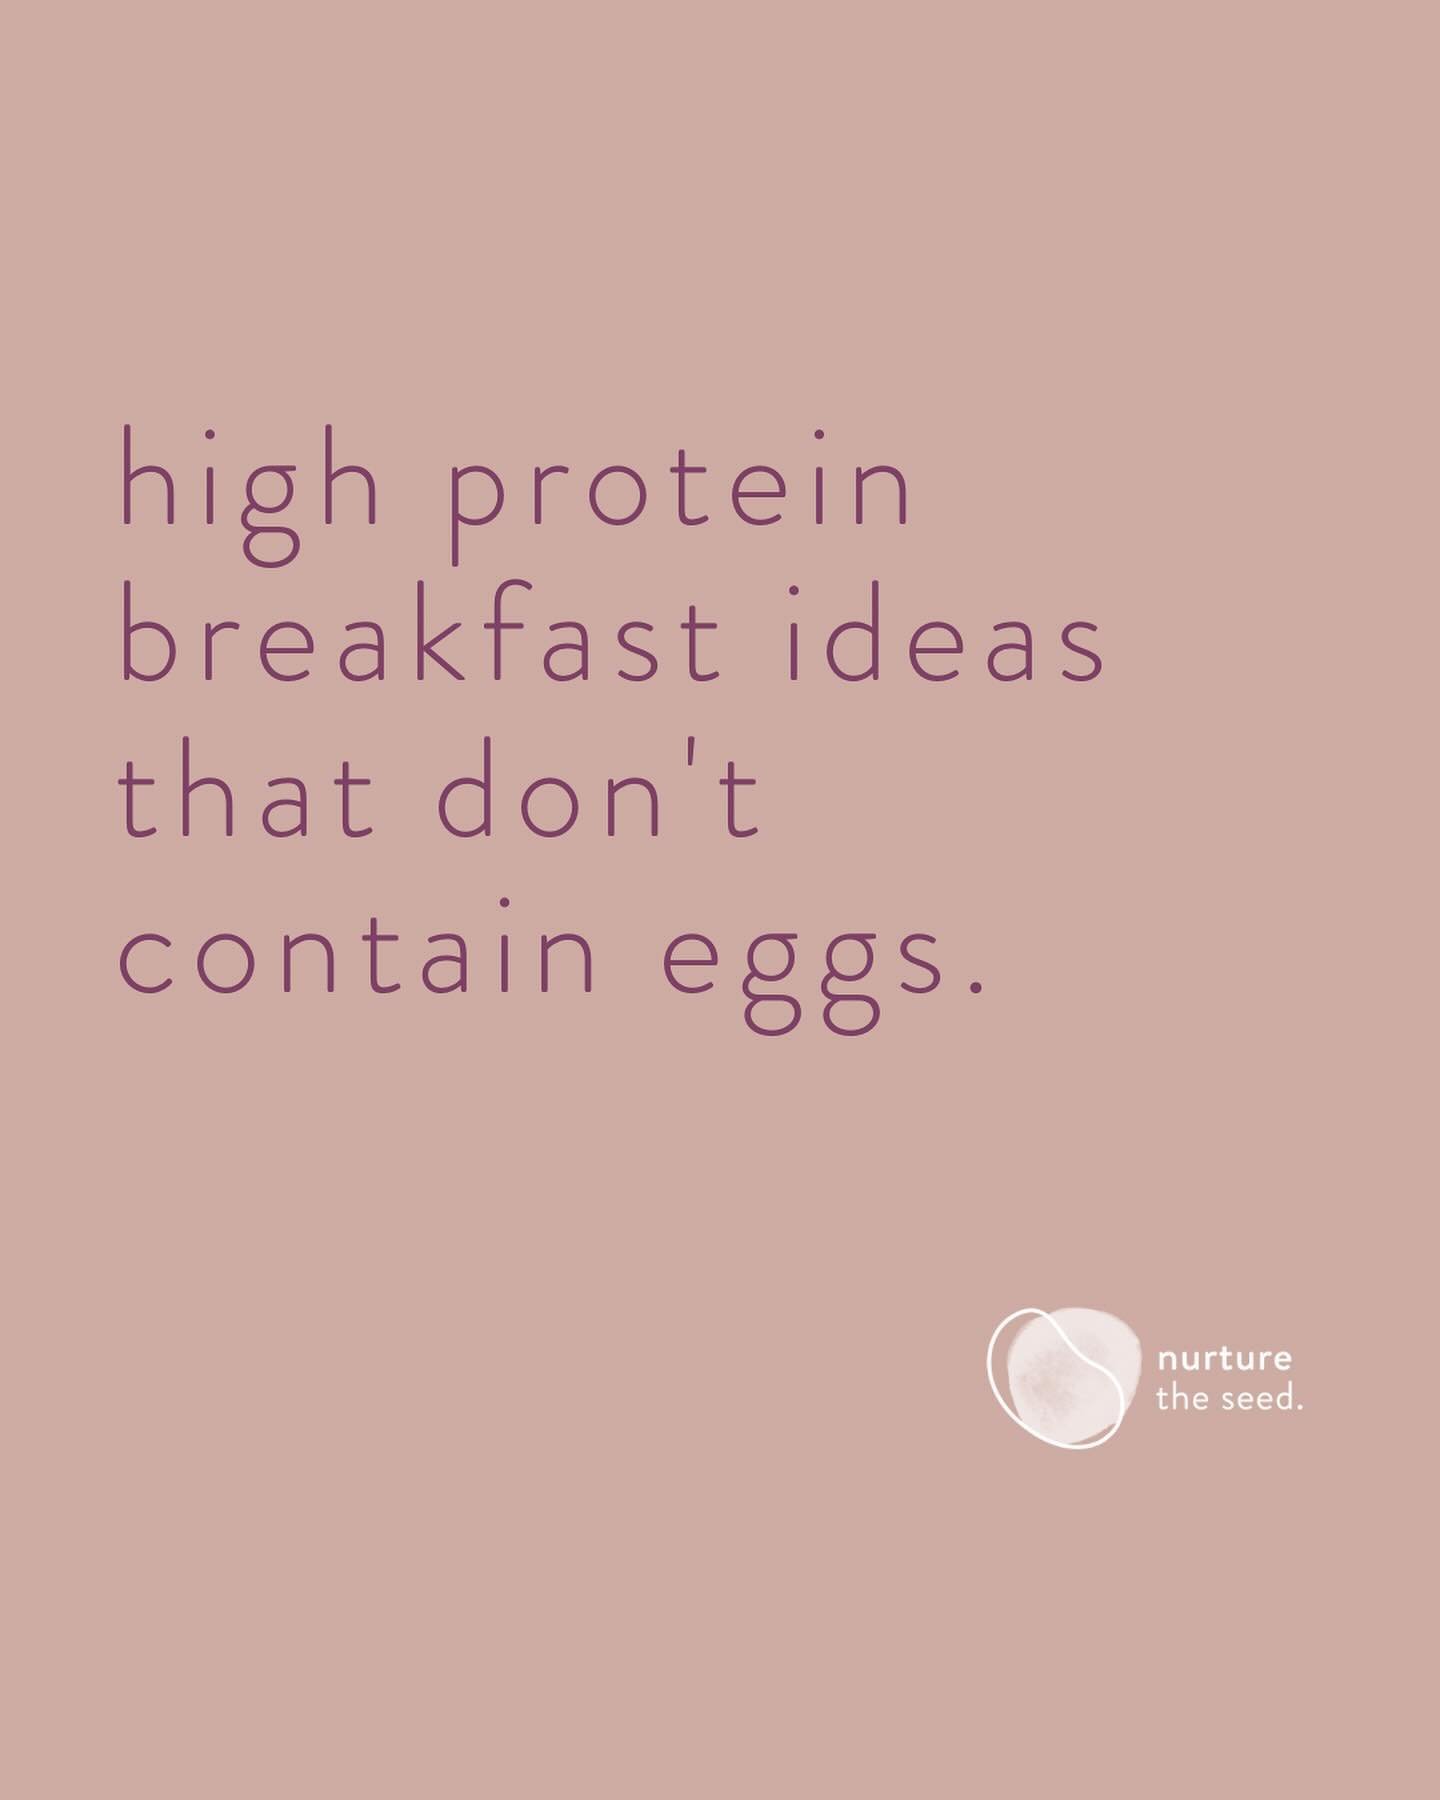 Breakfast doesn&rsquo;t have to contain eggs to be high in protein. Don&rsquo;t get me wrong, eggs are incredibly nutritious and I encourage everyone to include them in their diet if they can (pregnant and lactating women need a lot of choline which 